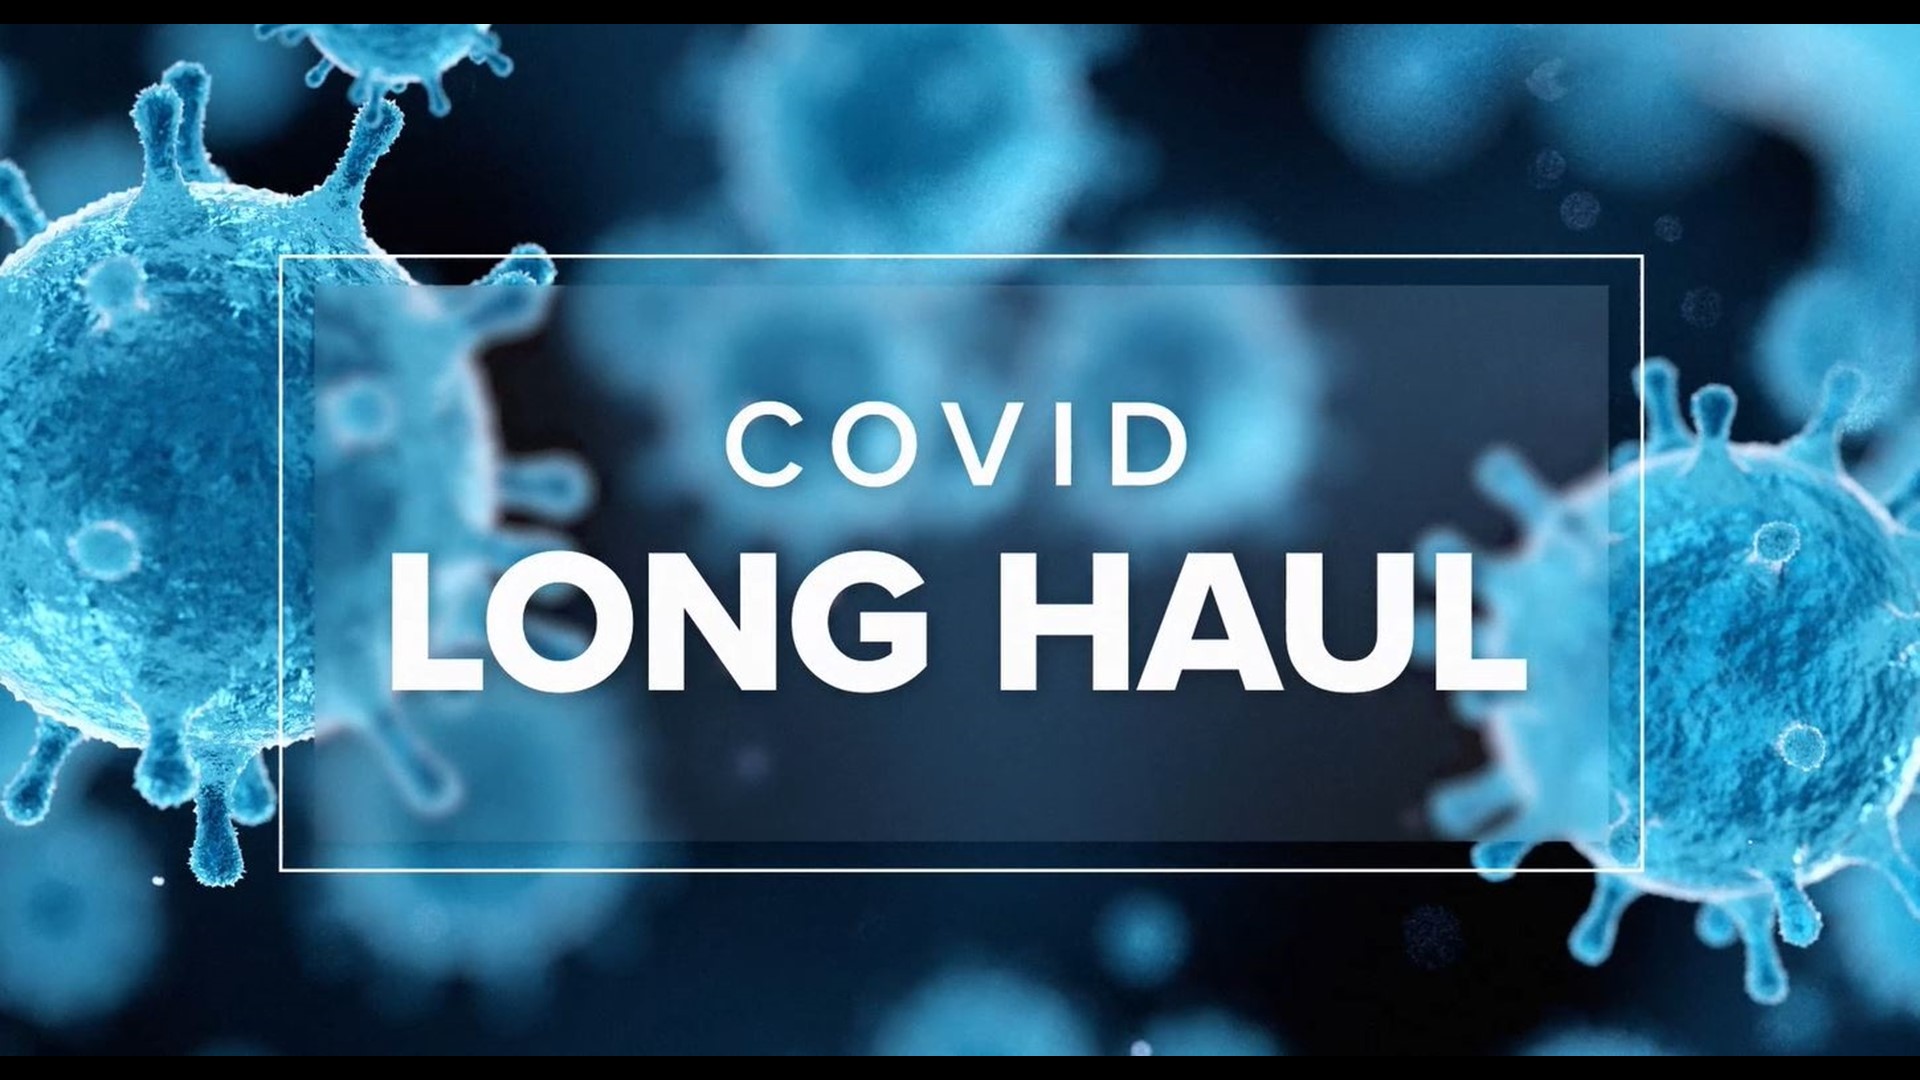 An in-depth look a the symptoms COVID long-haulers are dealing with two years into the pandemic, as well as a look into future treatments